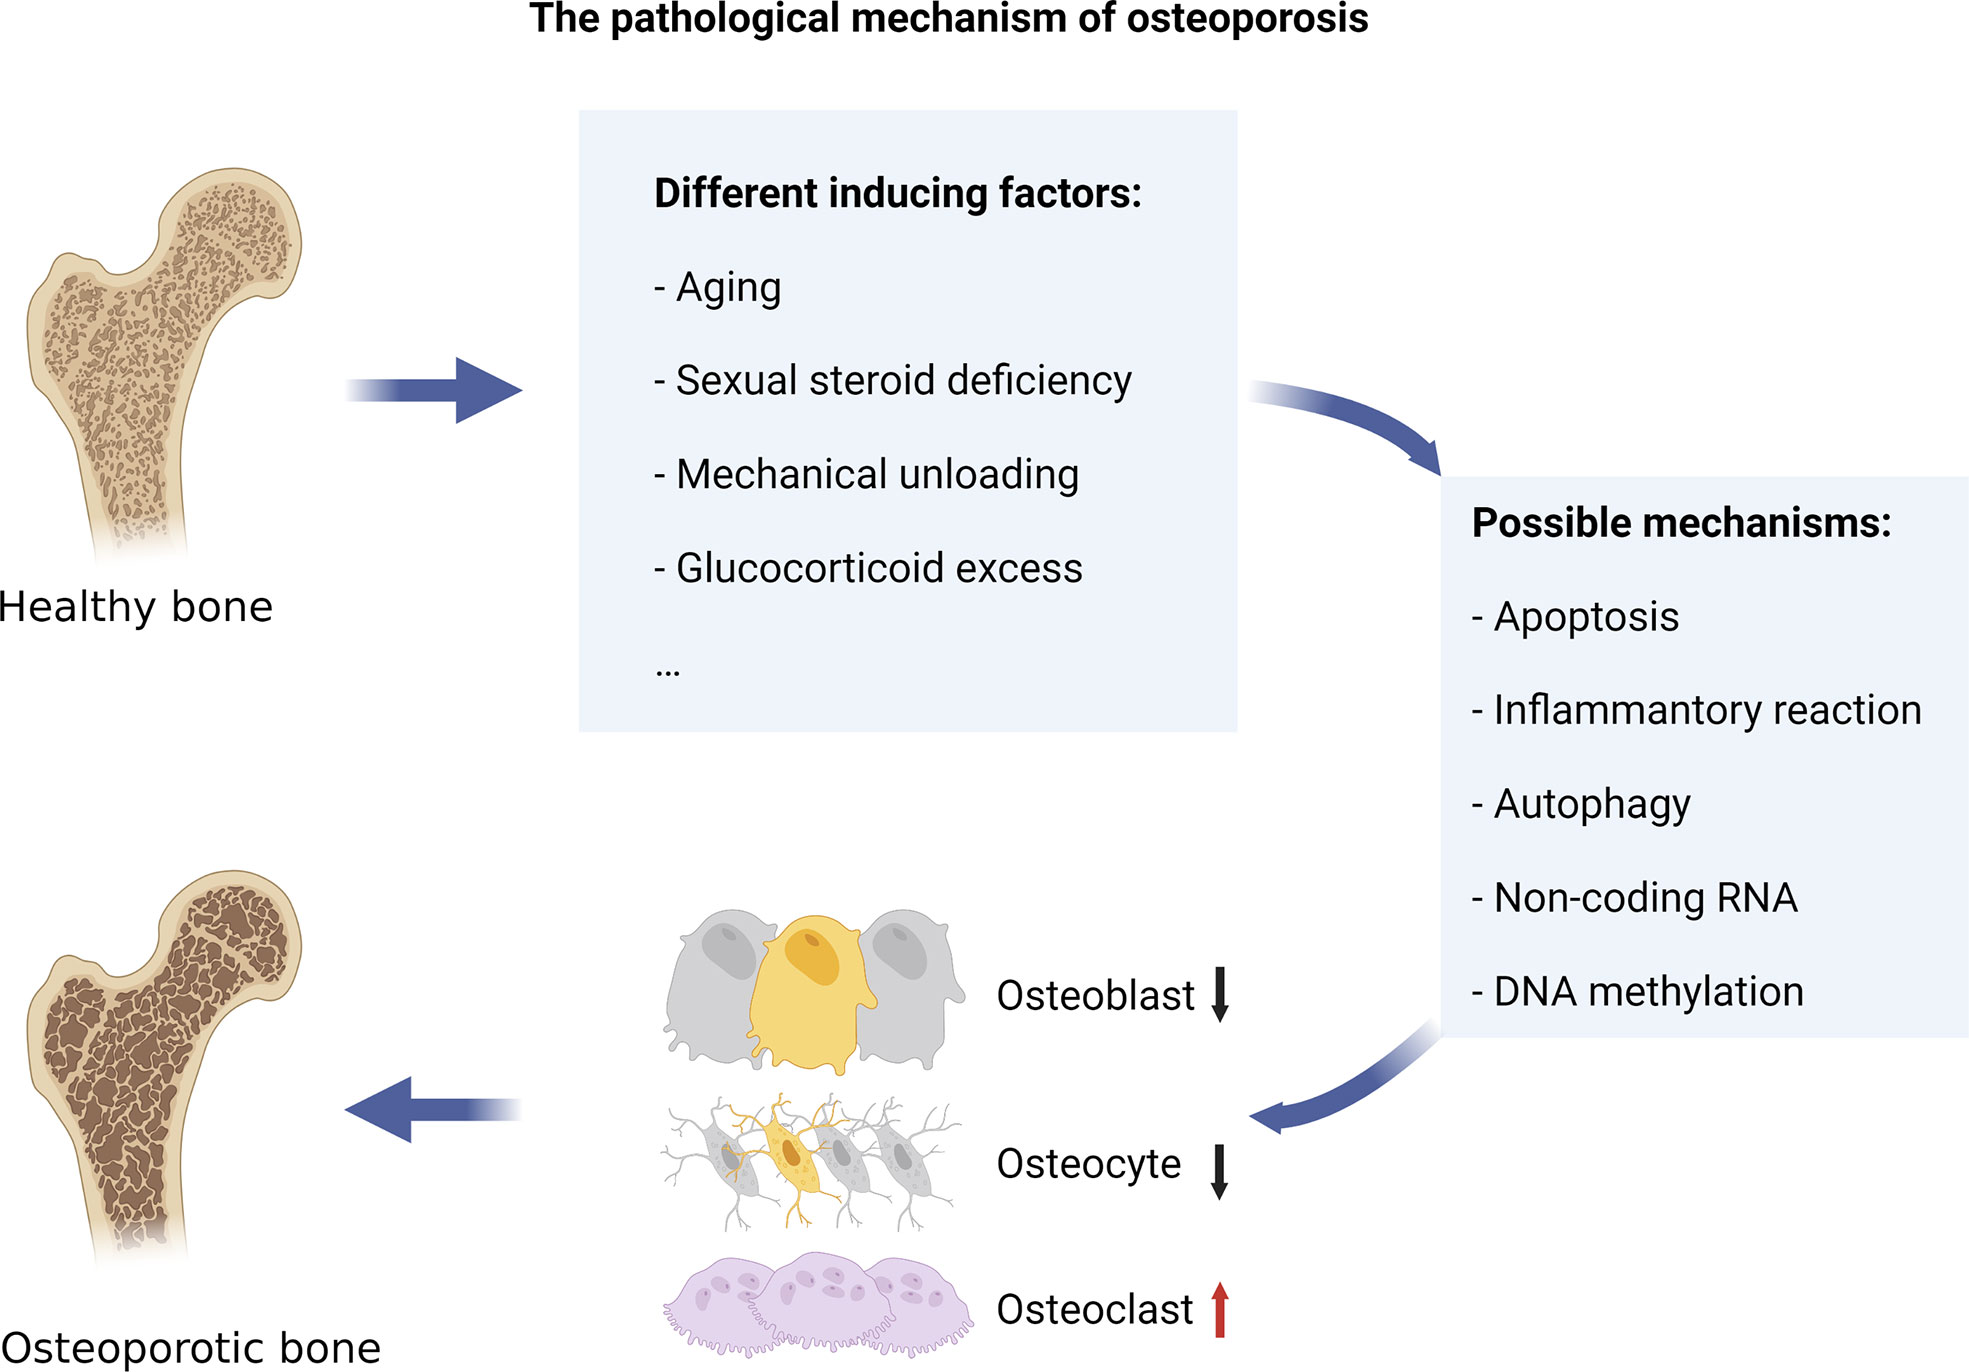 exercise for osteoporosis a literature review of pathology and mechanism